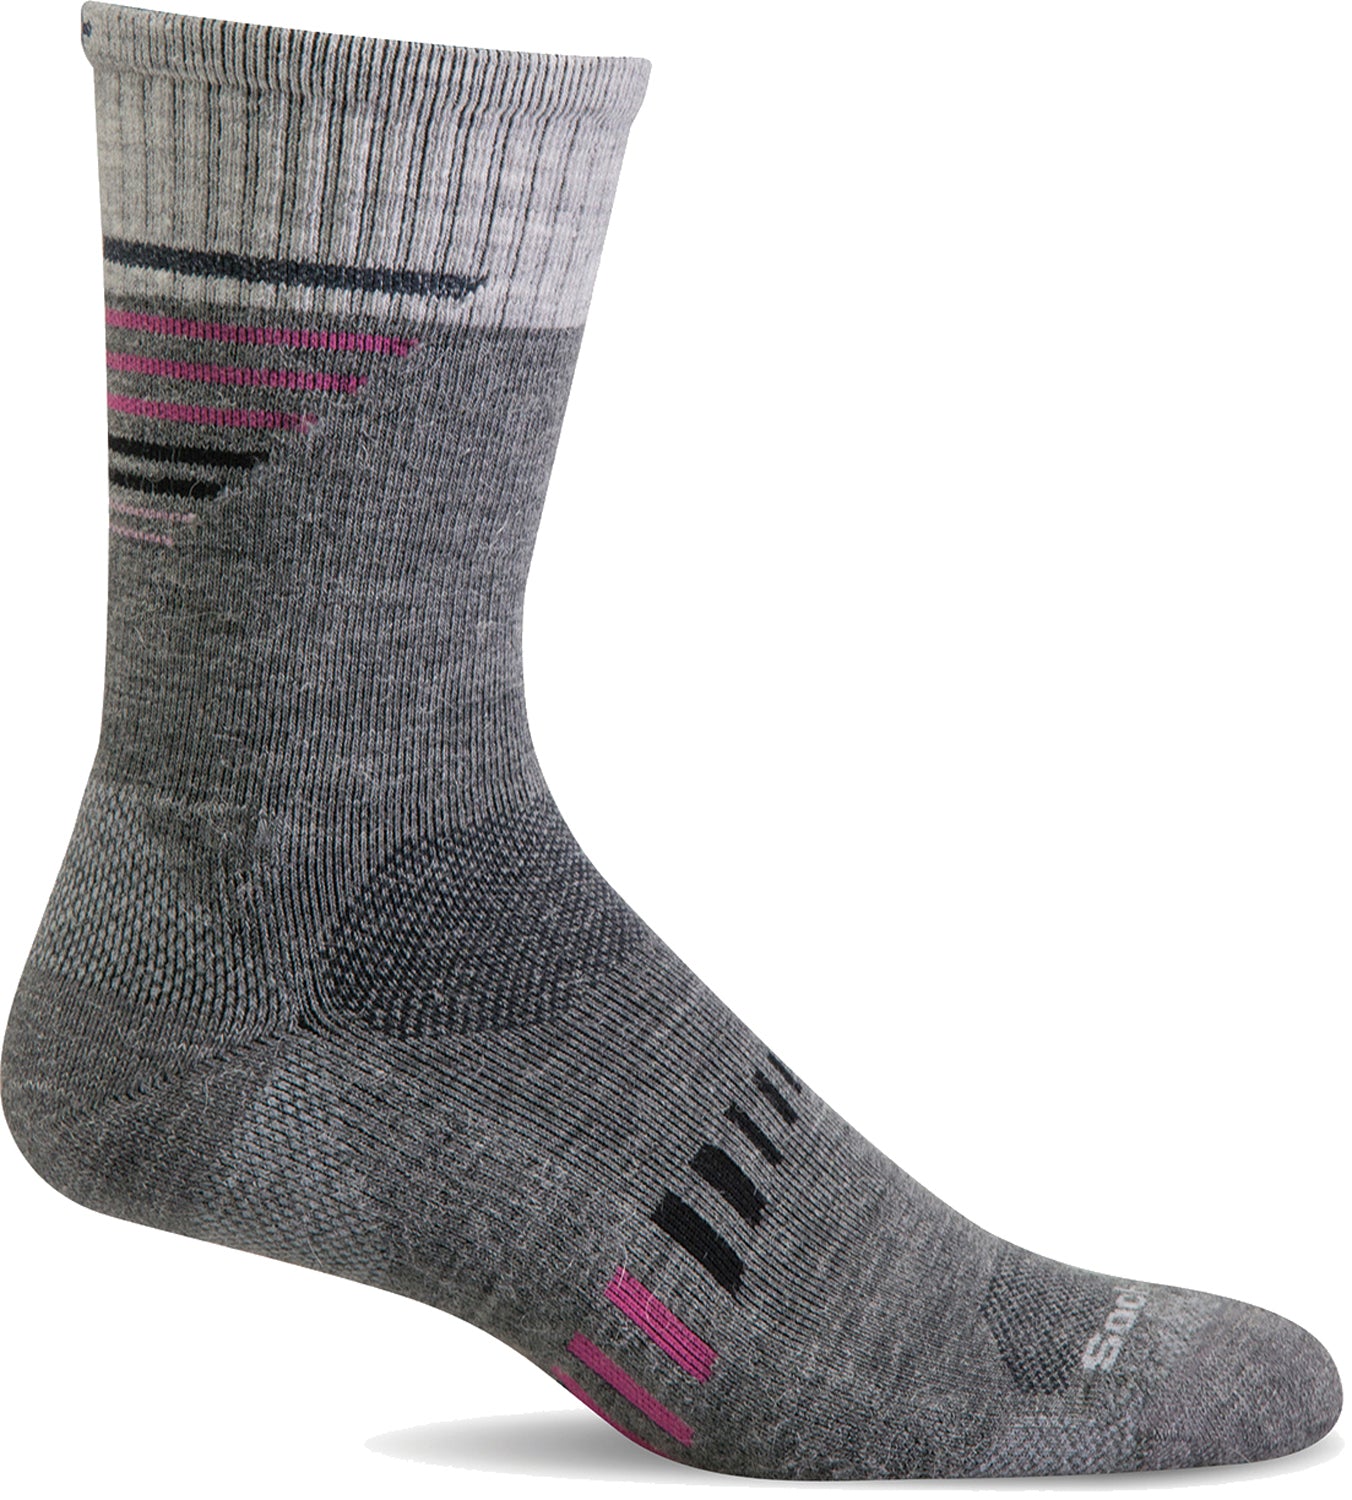 Sockwell Women's Ascend II Crew Moderate Graduated Compression Sock in Grey color from the side